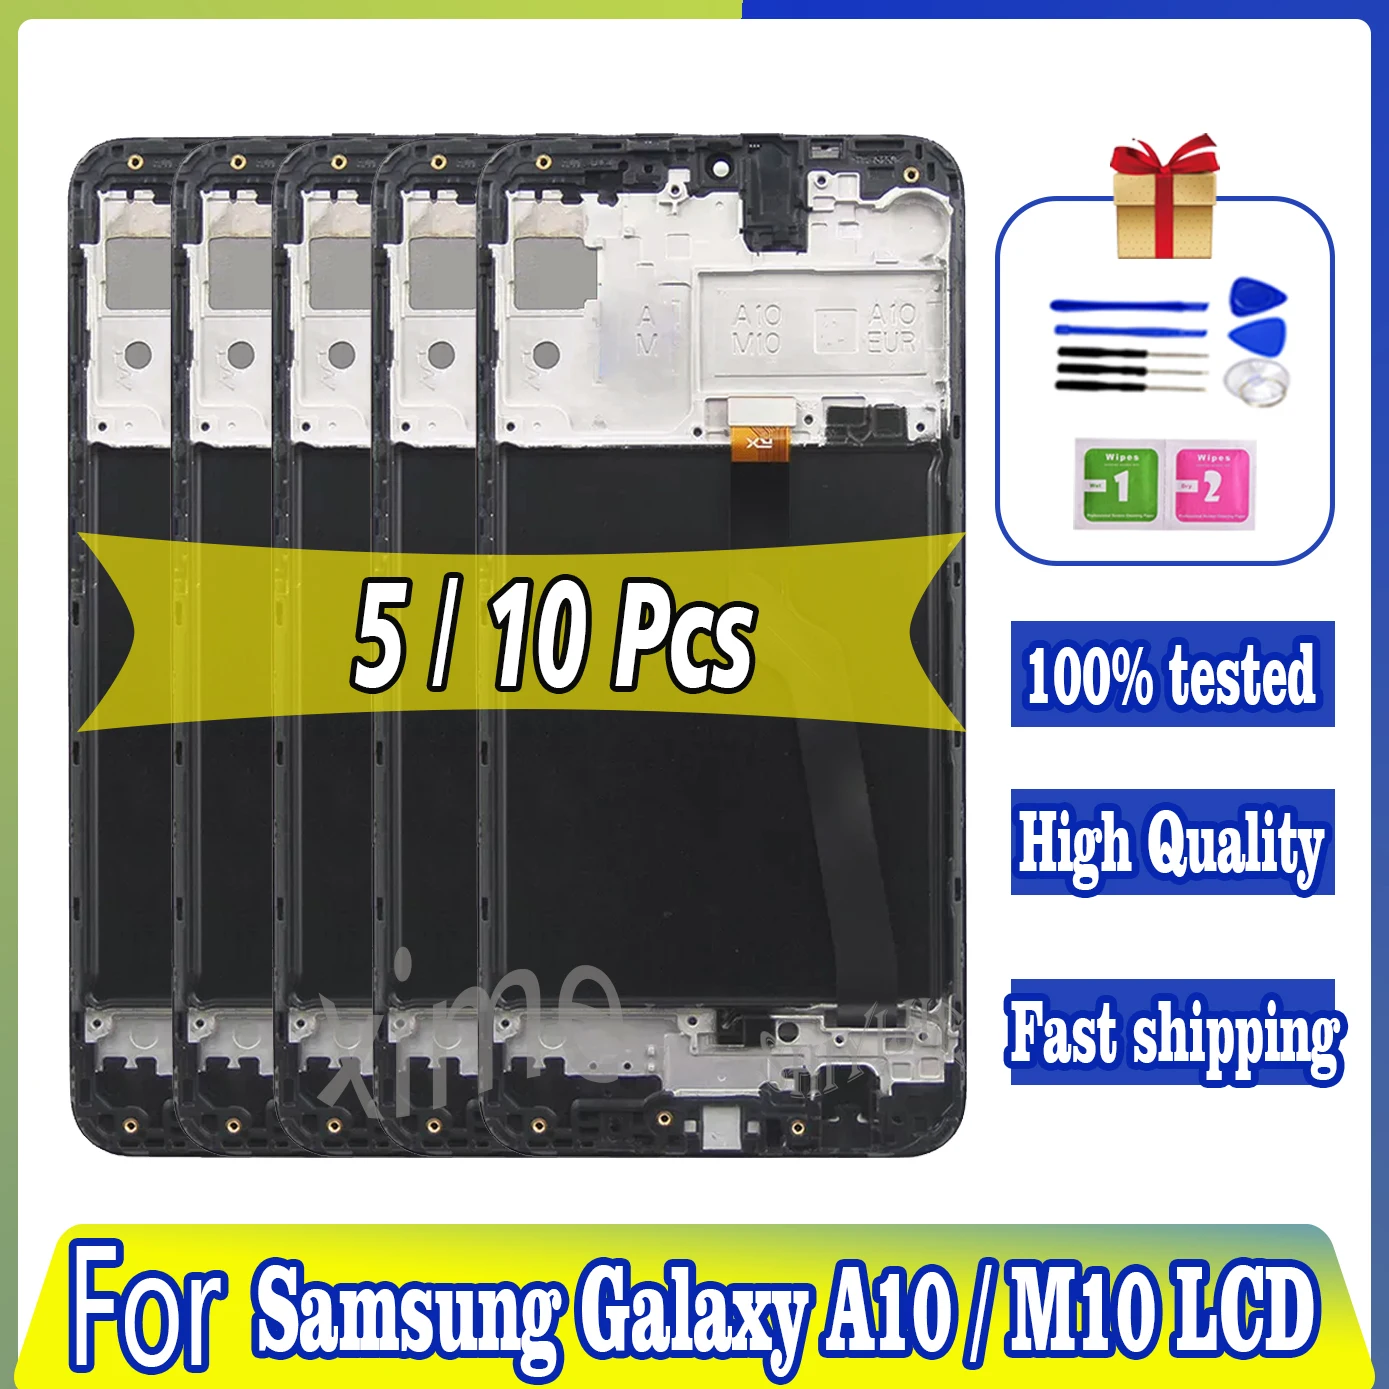 

5/10PCS Original Display For Samsung Galaxy A10 A105/DS A105F A105FD A105M Lcd Display Digitizer Touch Screen 100% Tested